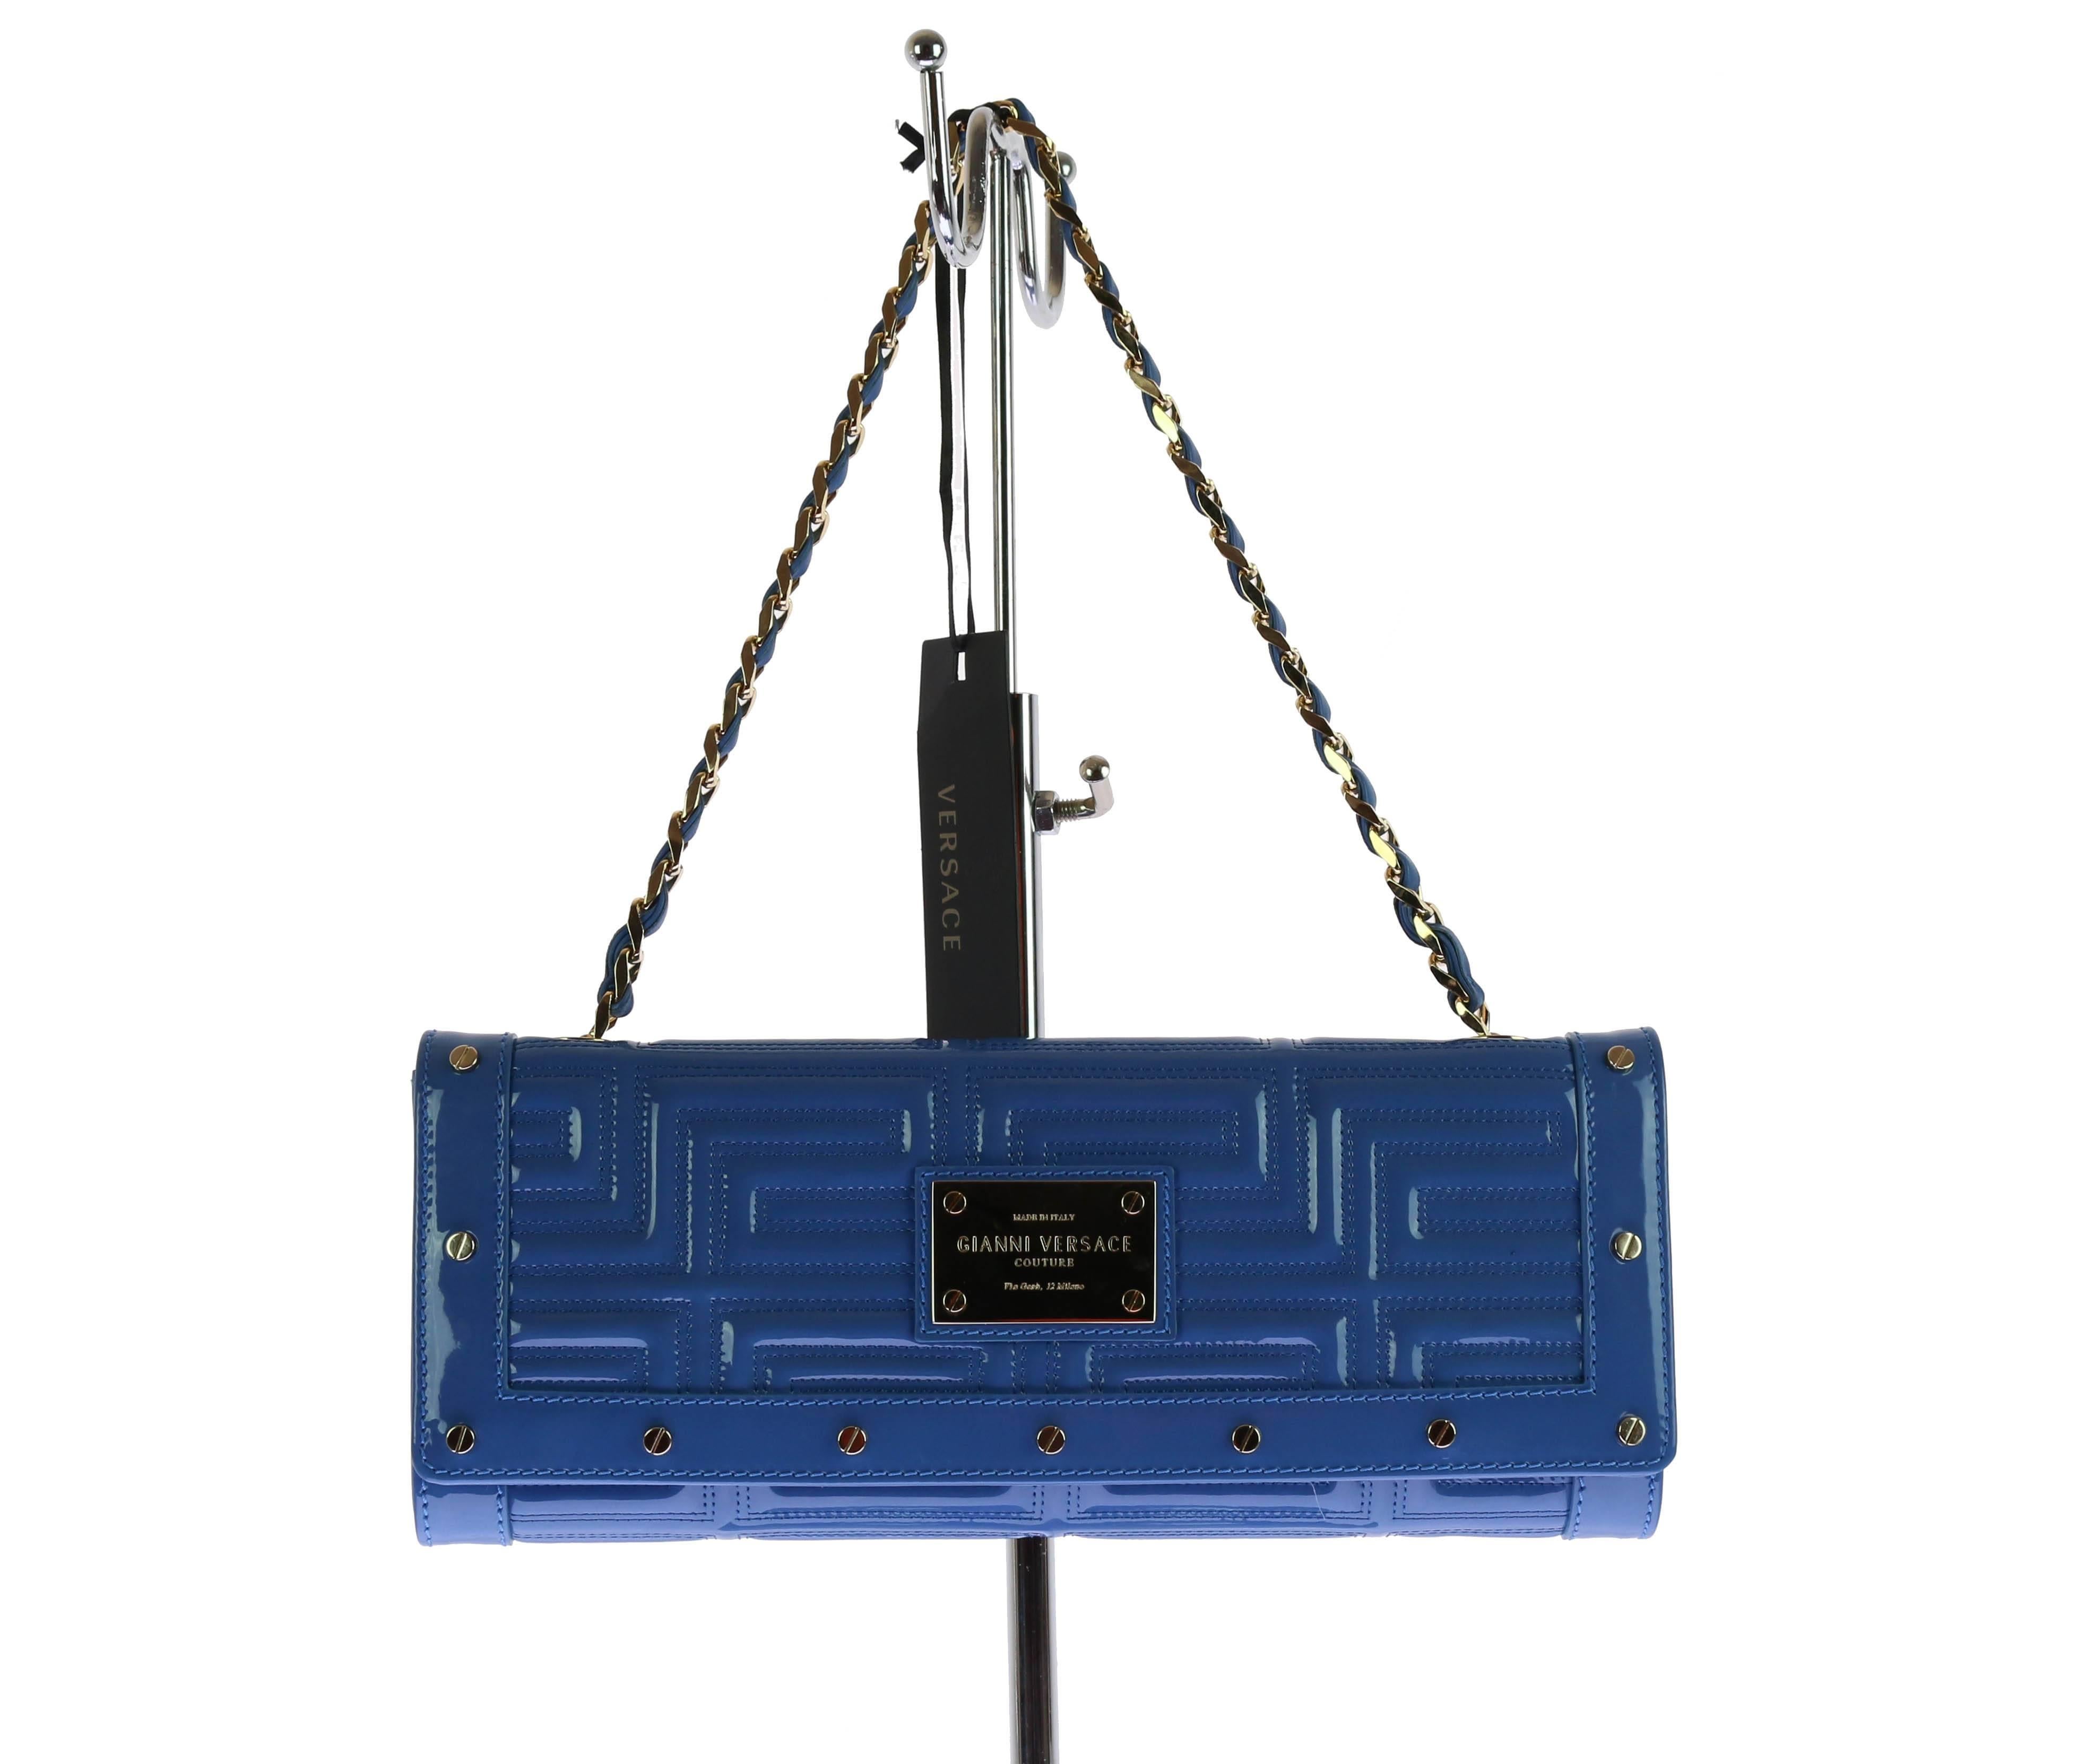 Gianni Versace Couture bag/clutch.
Blue patent leather with Greek Key embroidery.
Removable chain/leather strap.
Gold-tone center plaque.
Snap button.
One internal pocket.
Fully lined.
Measures approximately: 6